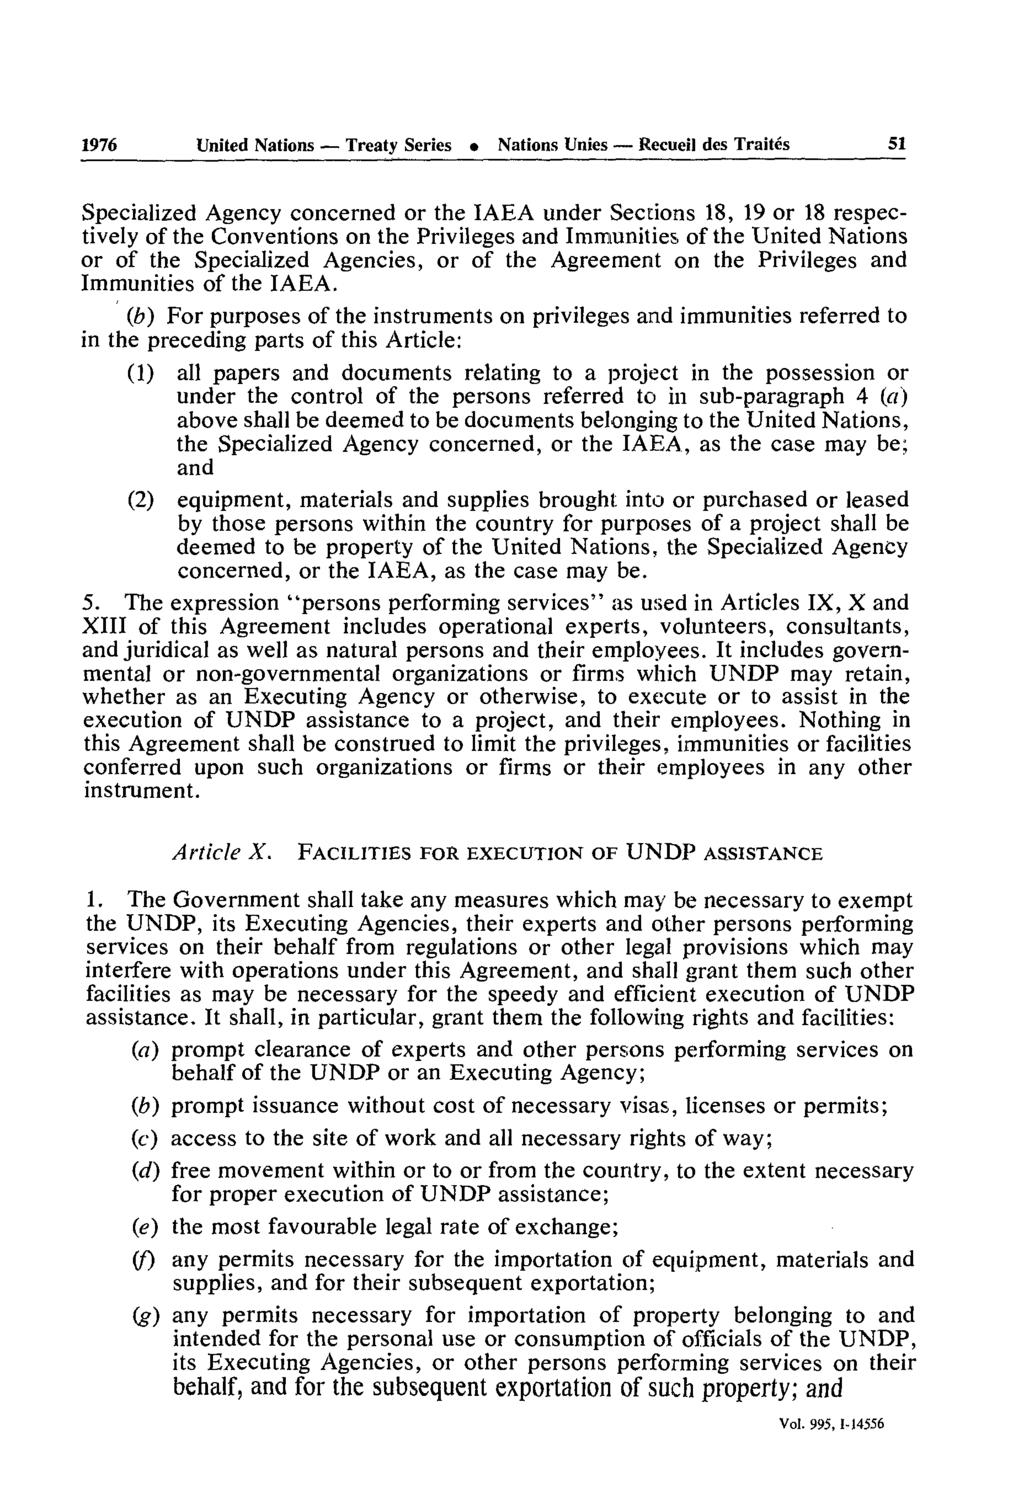 1976 United Nations Treaty Series Nations Unies Recueil des Traités 51 Specialized Agency concerned or the IAEA under Sections 18, 19 or 18 respec tively of the Conventions on the Privileges and